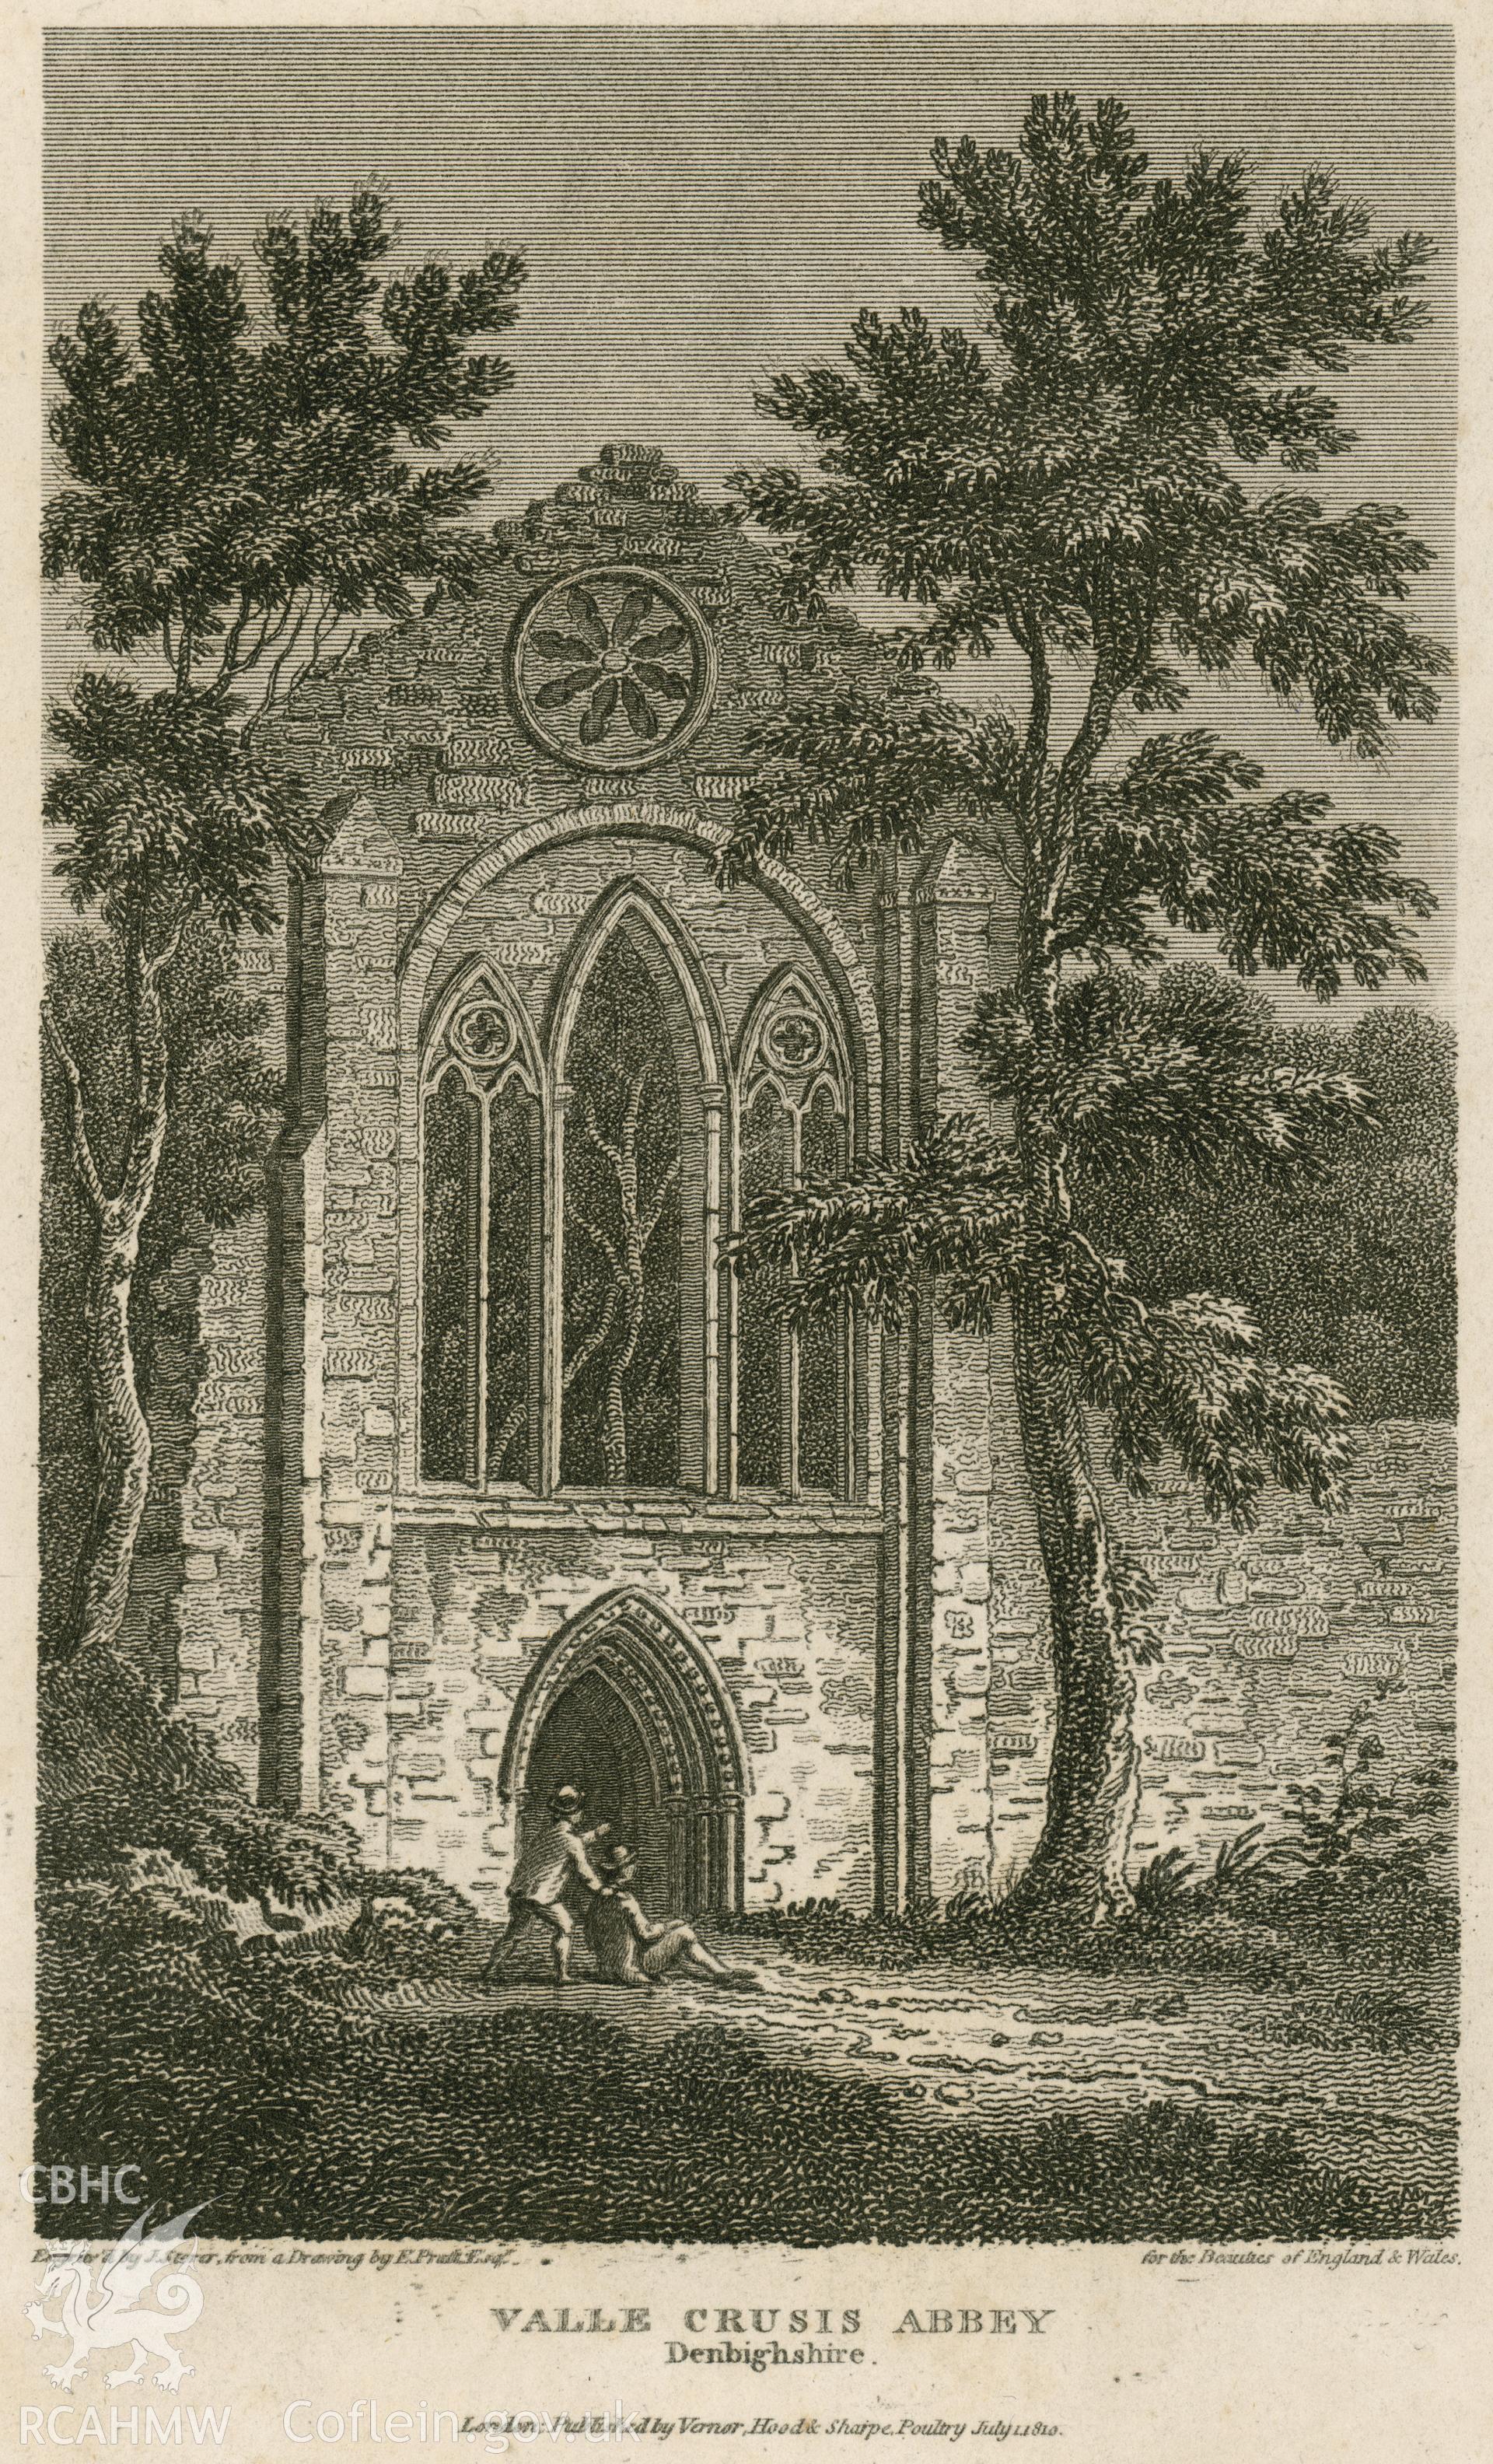 A black and white copy of a drawing showing Valle Crucis Abbey, near Llangollen.